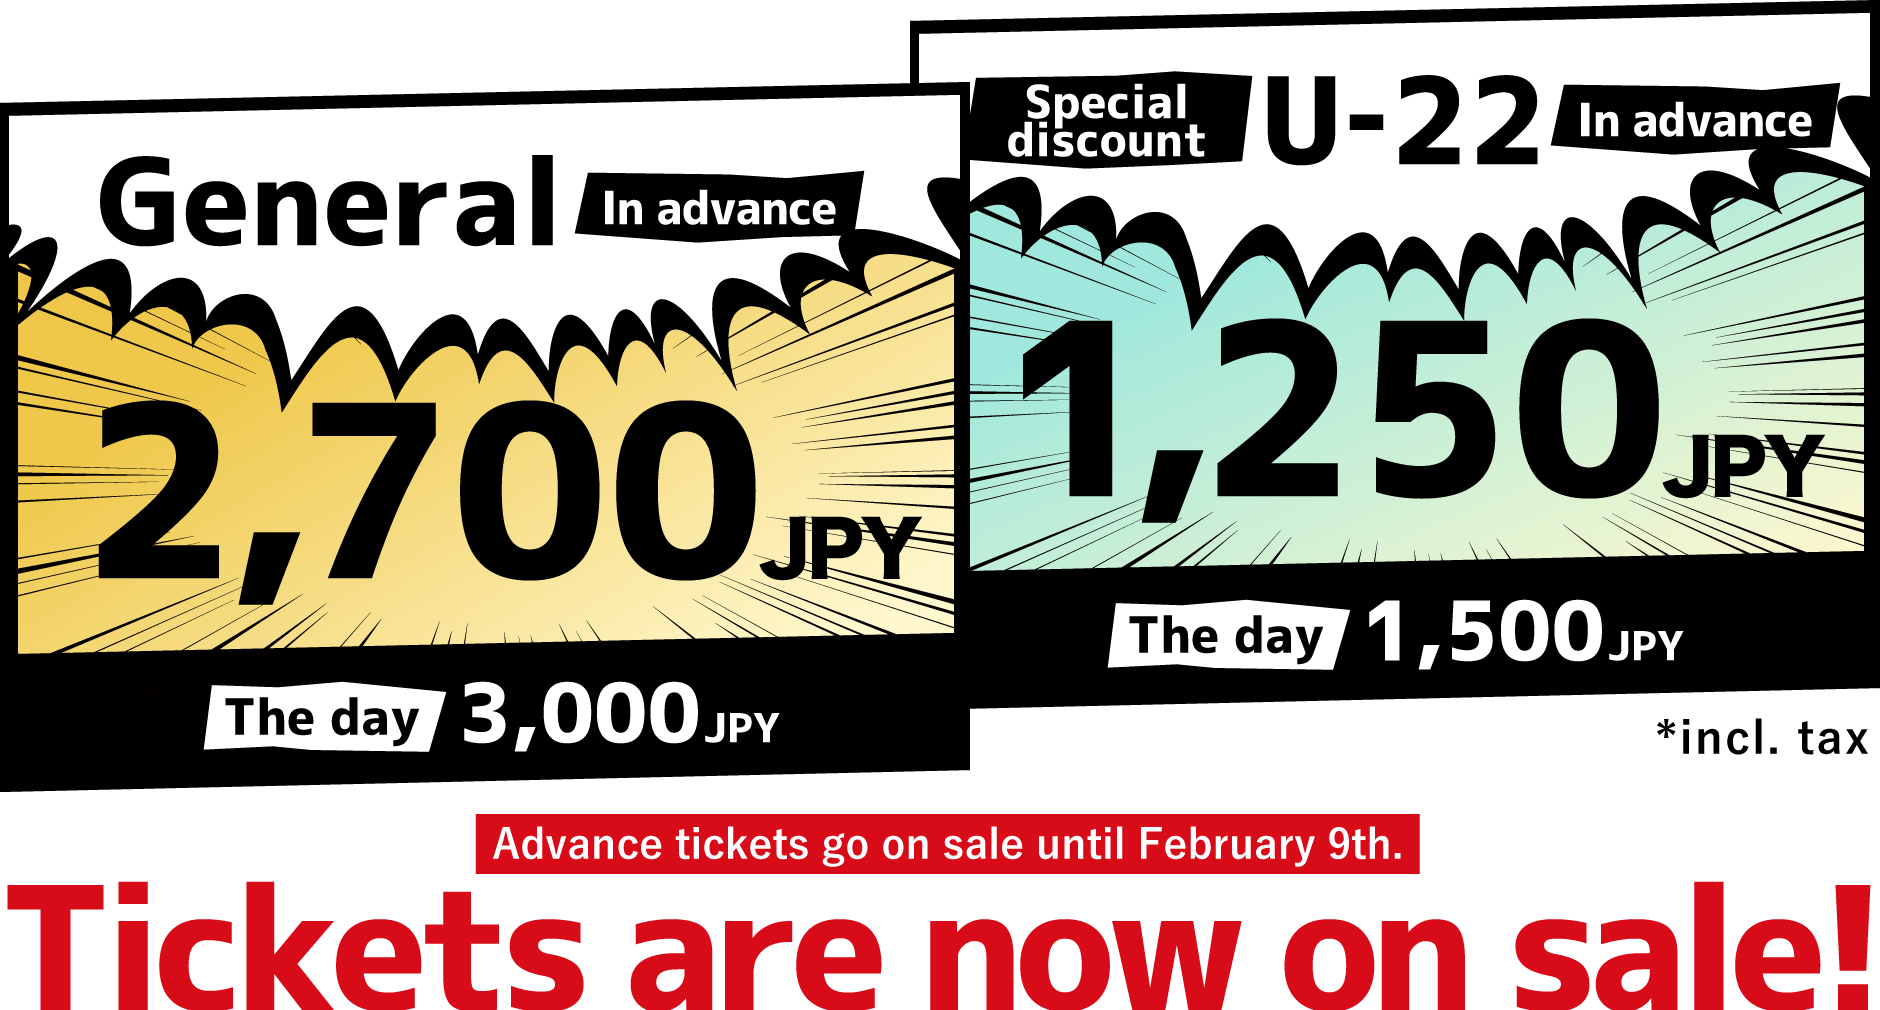 Tickets are now on sale! General ticket: 2,700 JPY (incl. tax) in advance, 3,000 JPY (incl. tax) on the day Special discount ticket (U-22): 1,250 JPY (incl. tax) in advance, 1,500 JPY (incl. tax) on the day Advance tickets go on sale until February 9th.